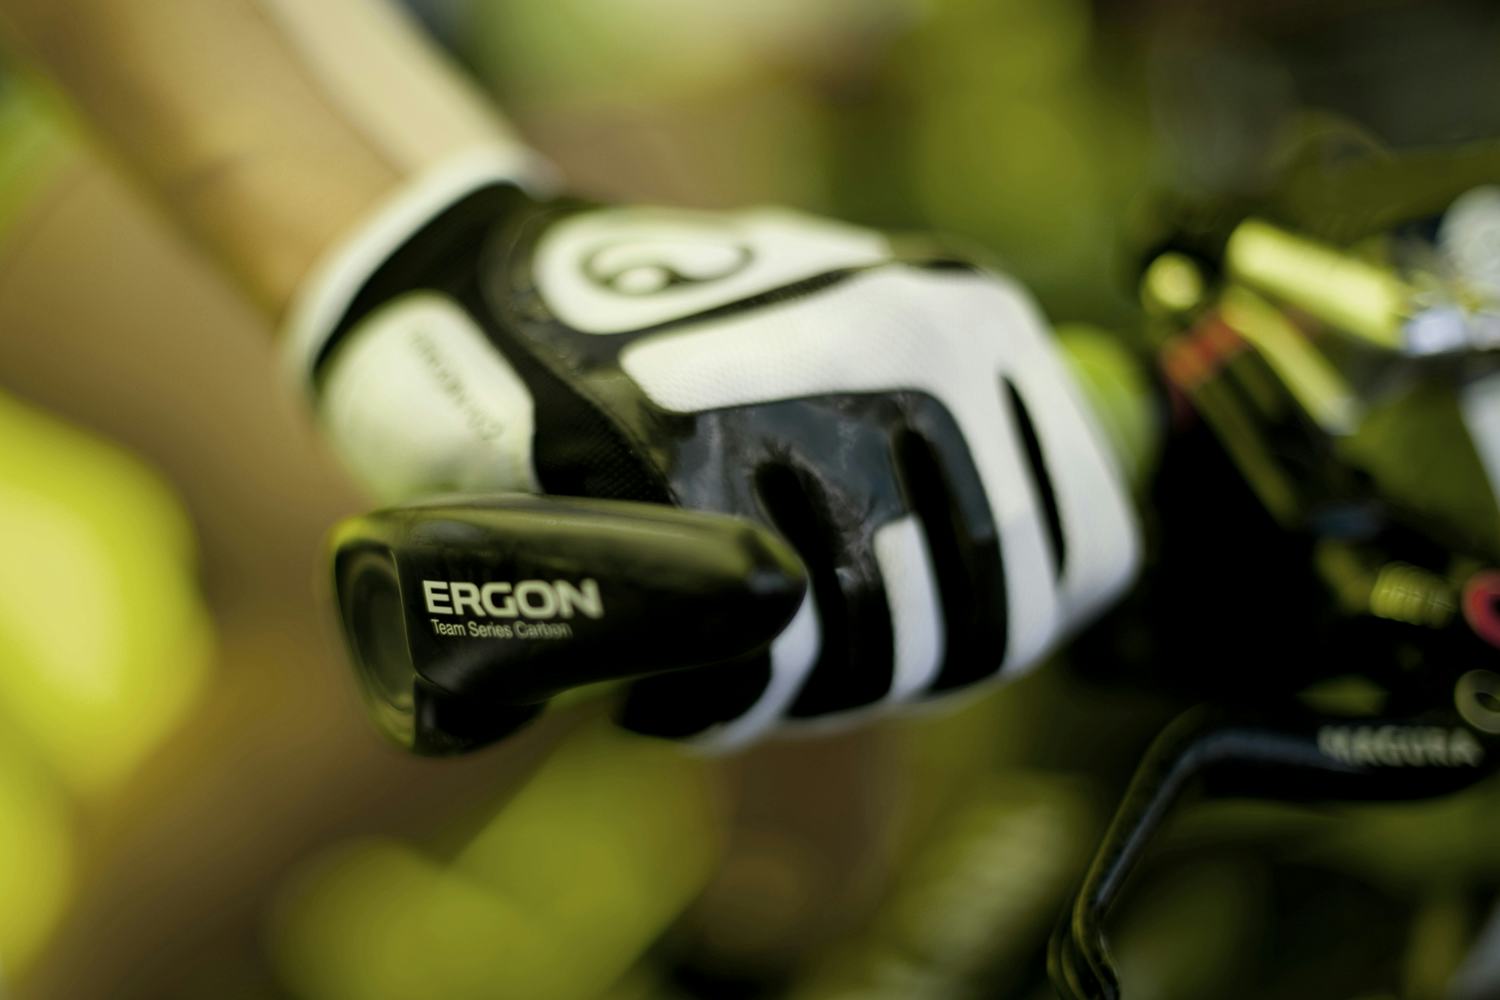 The licensing agreement gives Ritchey rights to two of Ergon’s patents for bike grips with integrated bar-ends.